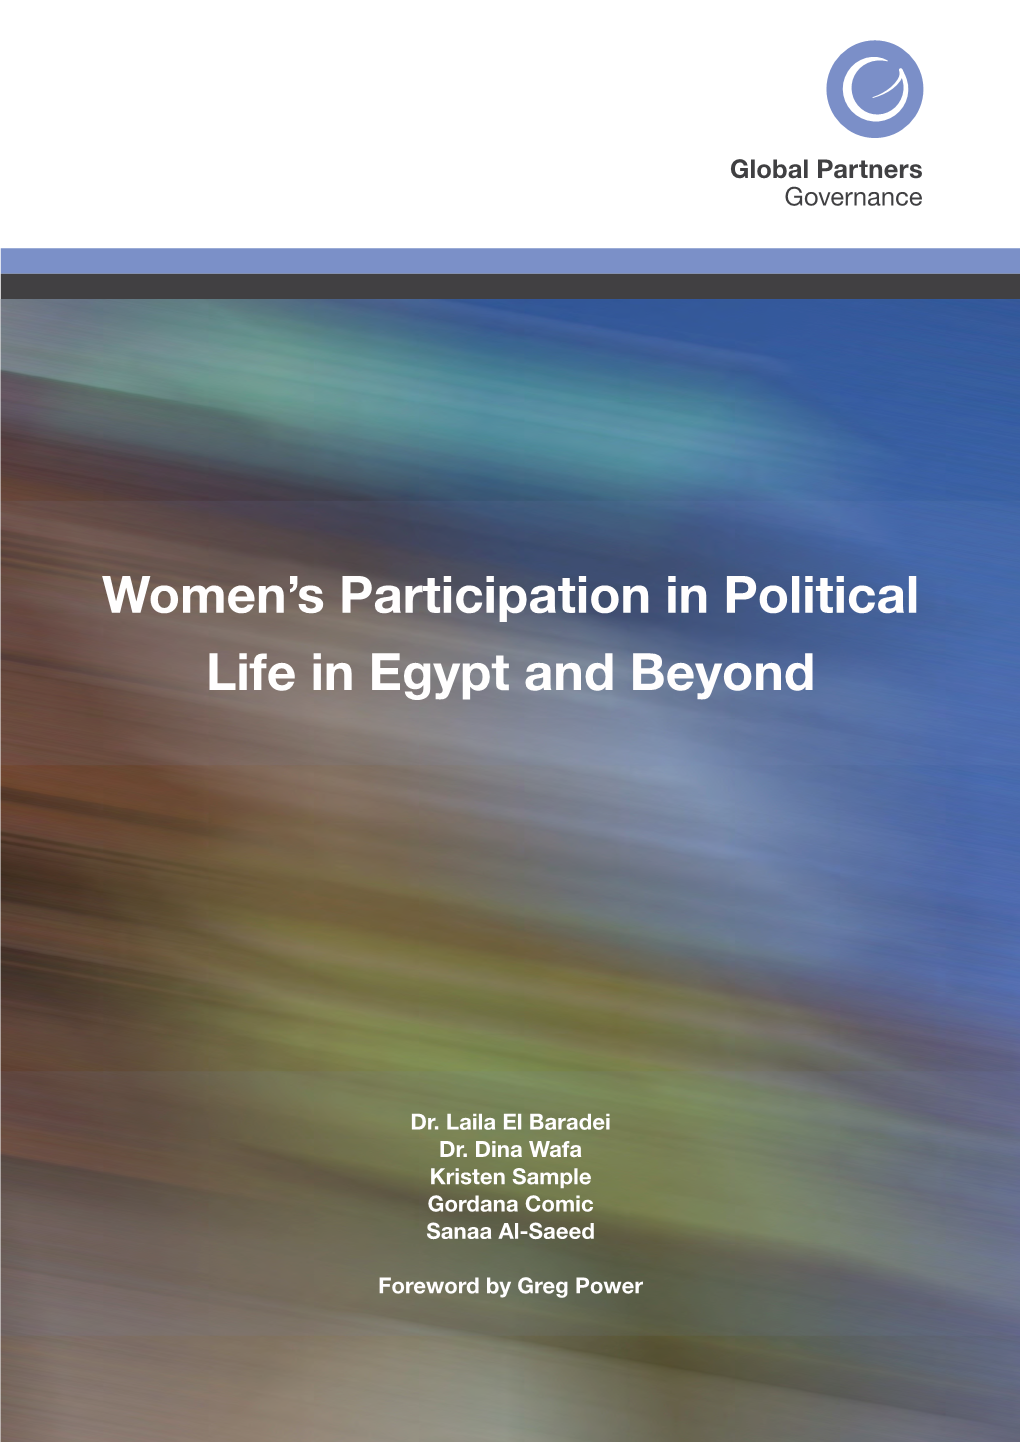 Women's Participation in Political Life in Egypt and Beyond